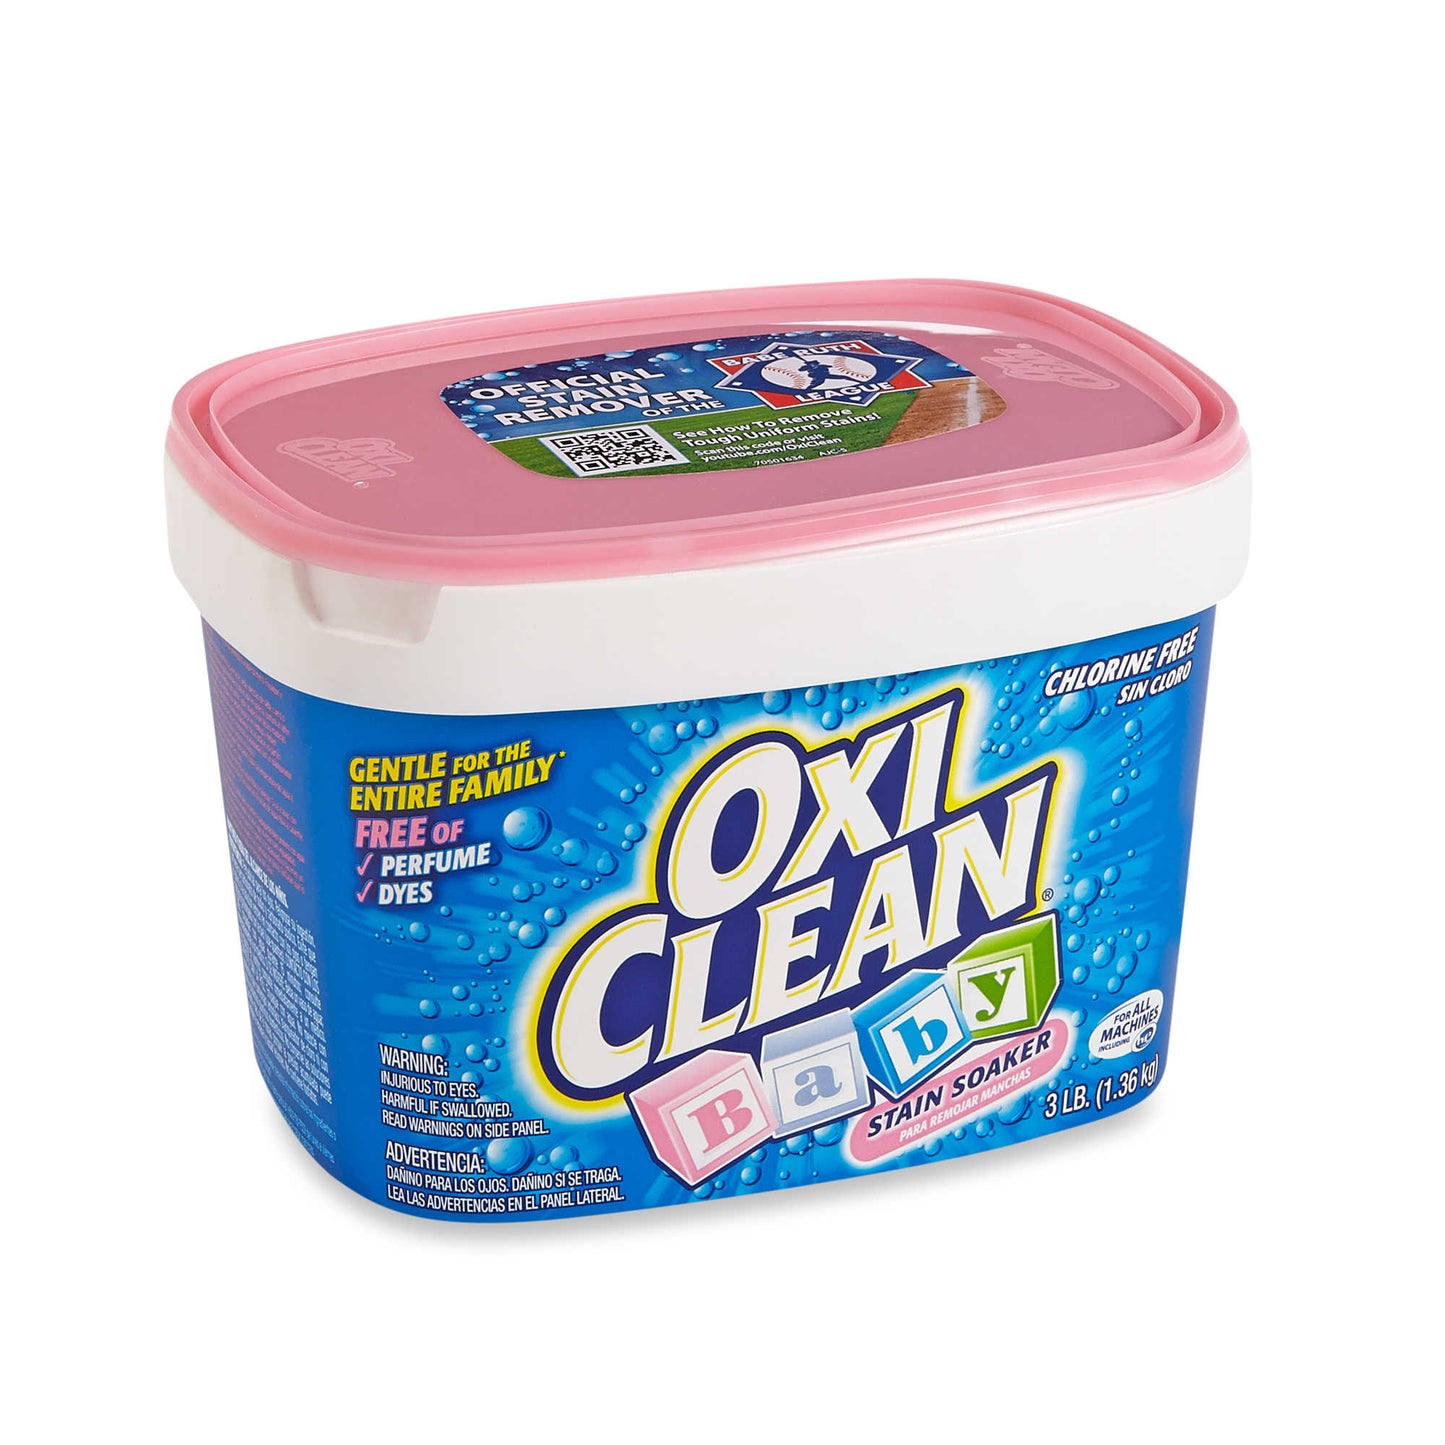 OxiClean Versatile Stain Remover Baby Stain Soaker - 3lb/4pk